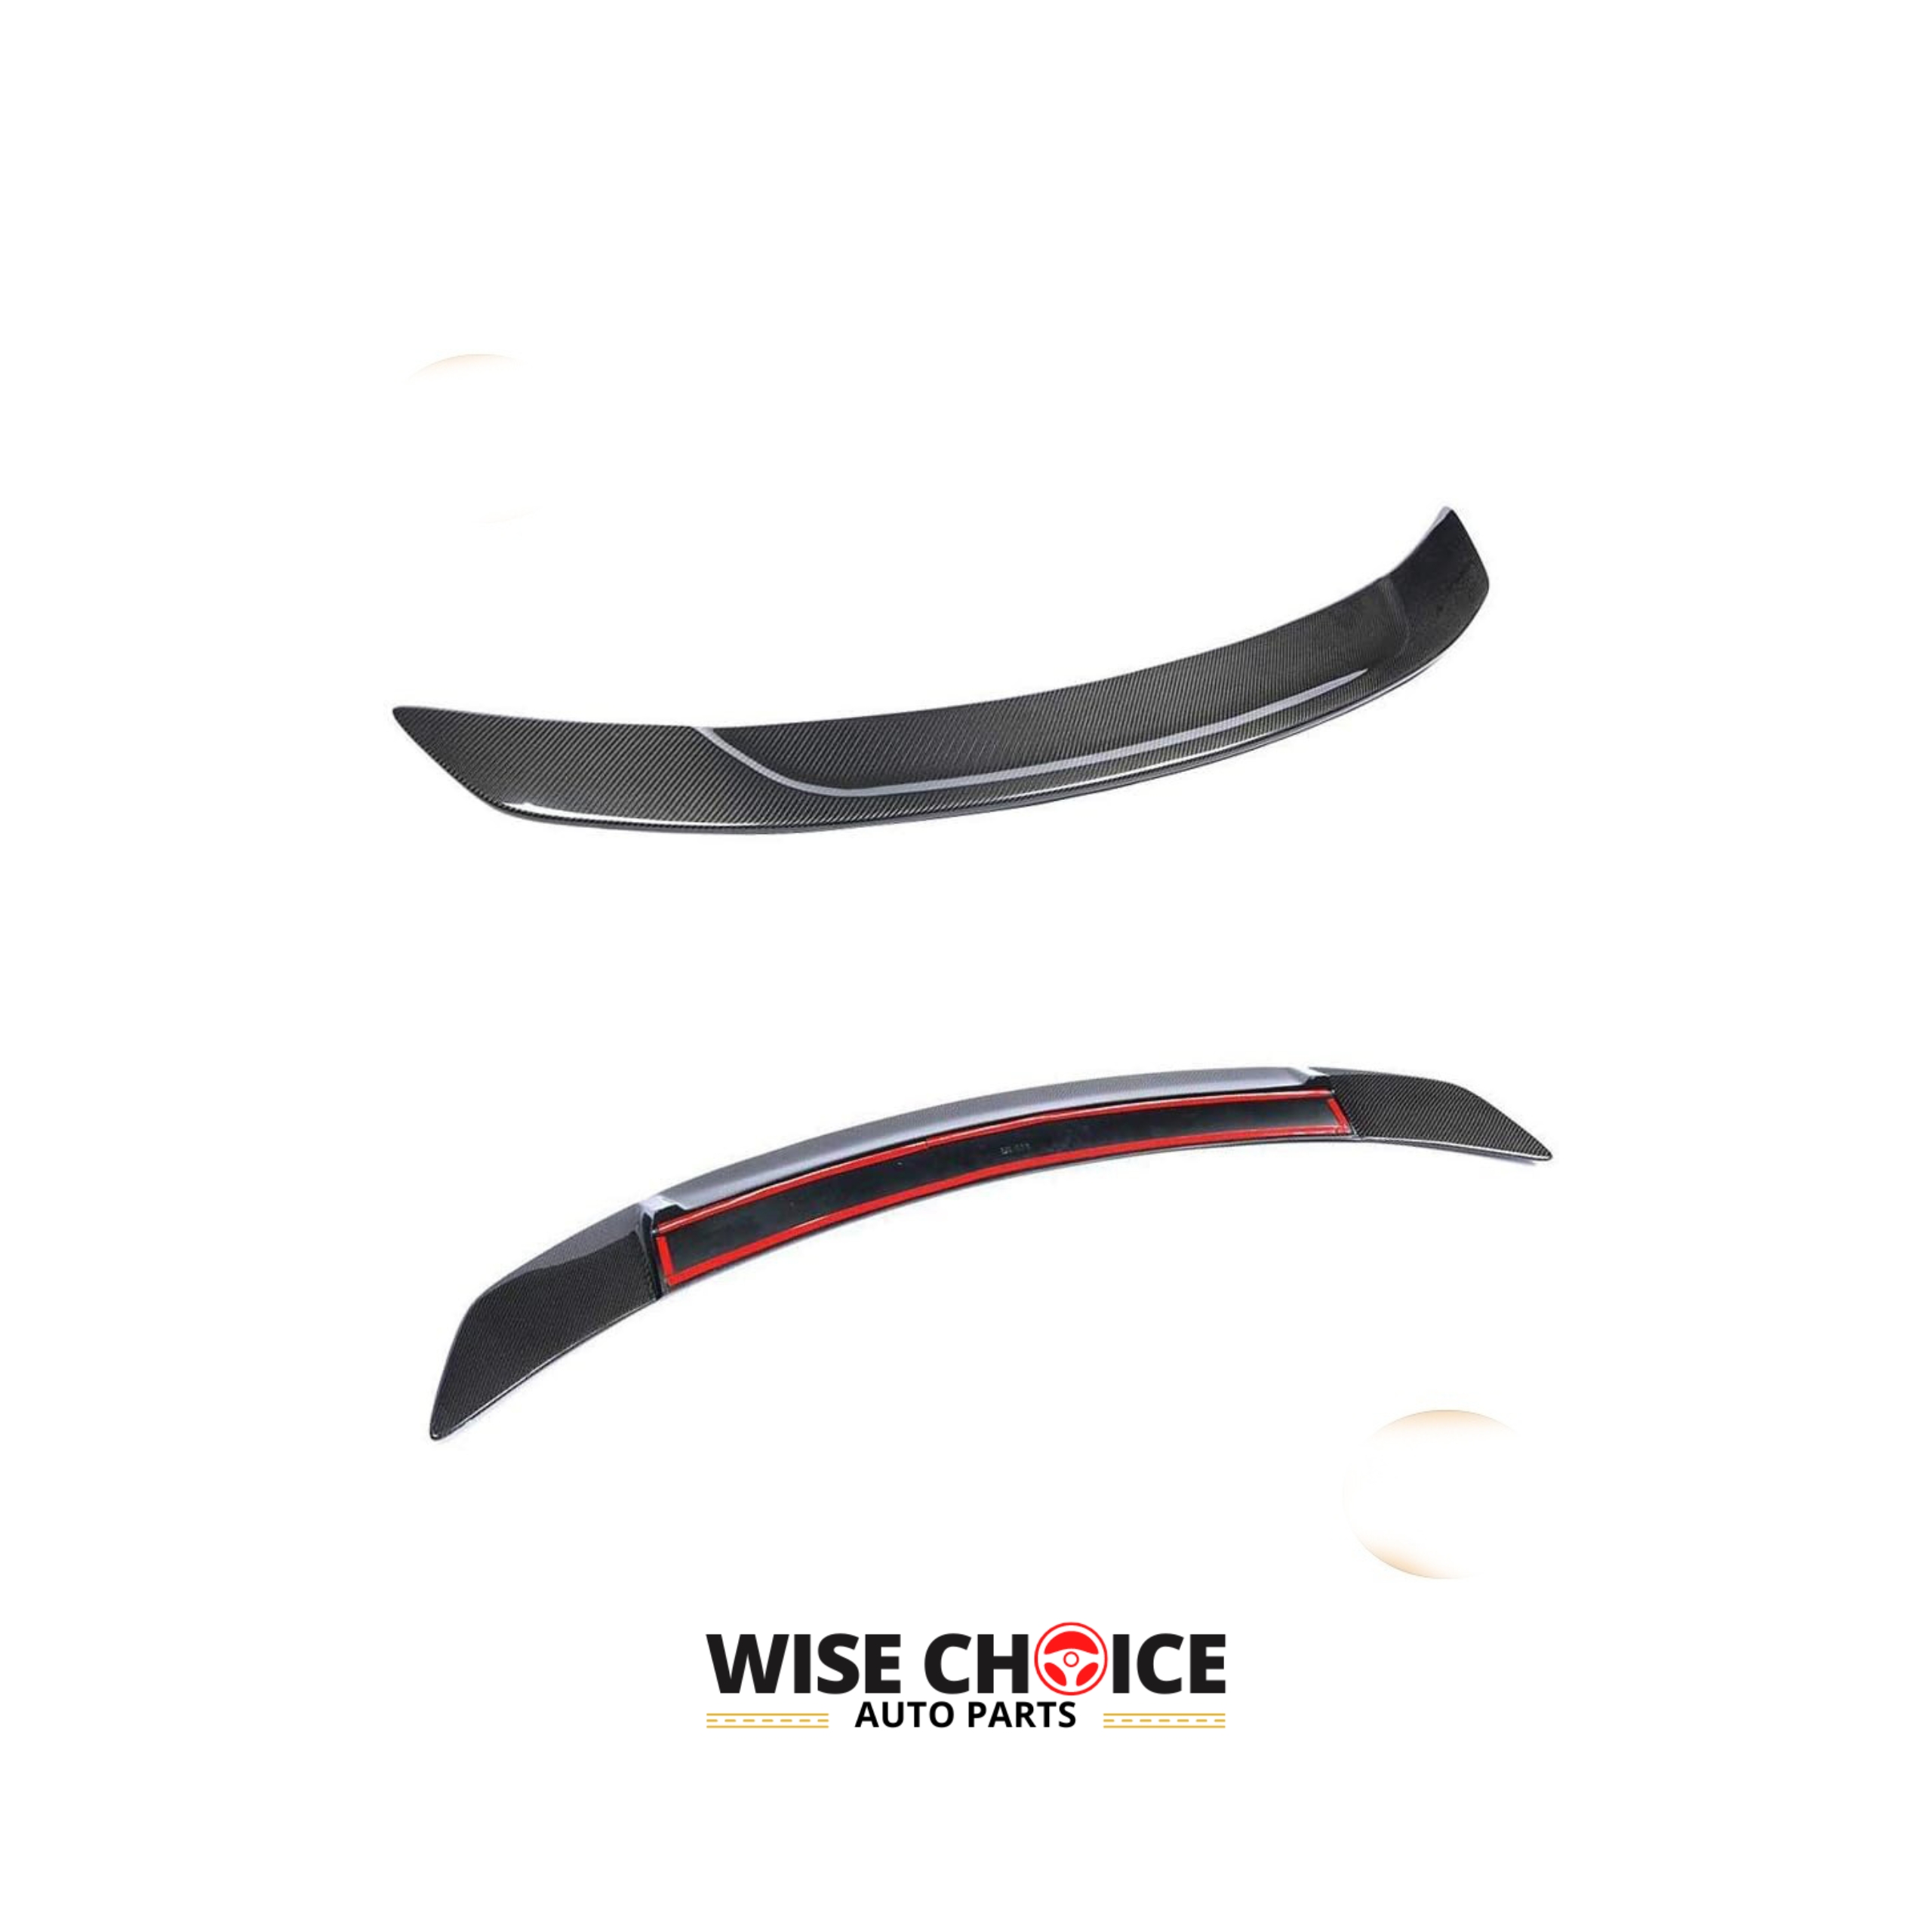 2012-2018 M-Benz CLS CLASS W218 Carbon Fiber Rear Trunk Spoiler on white background